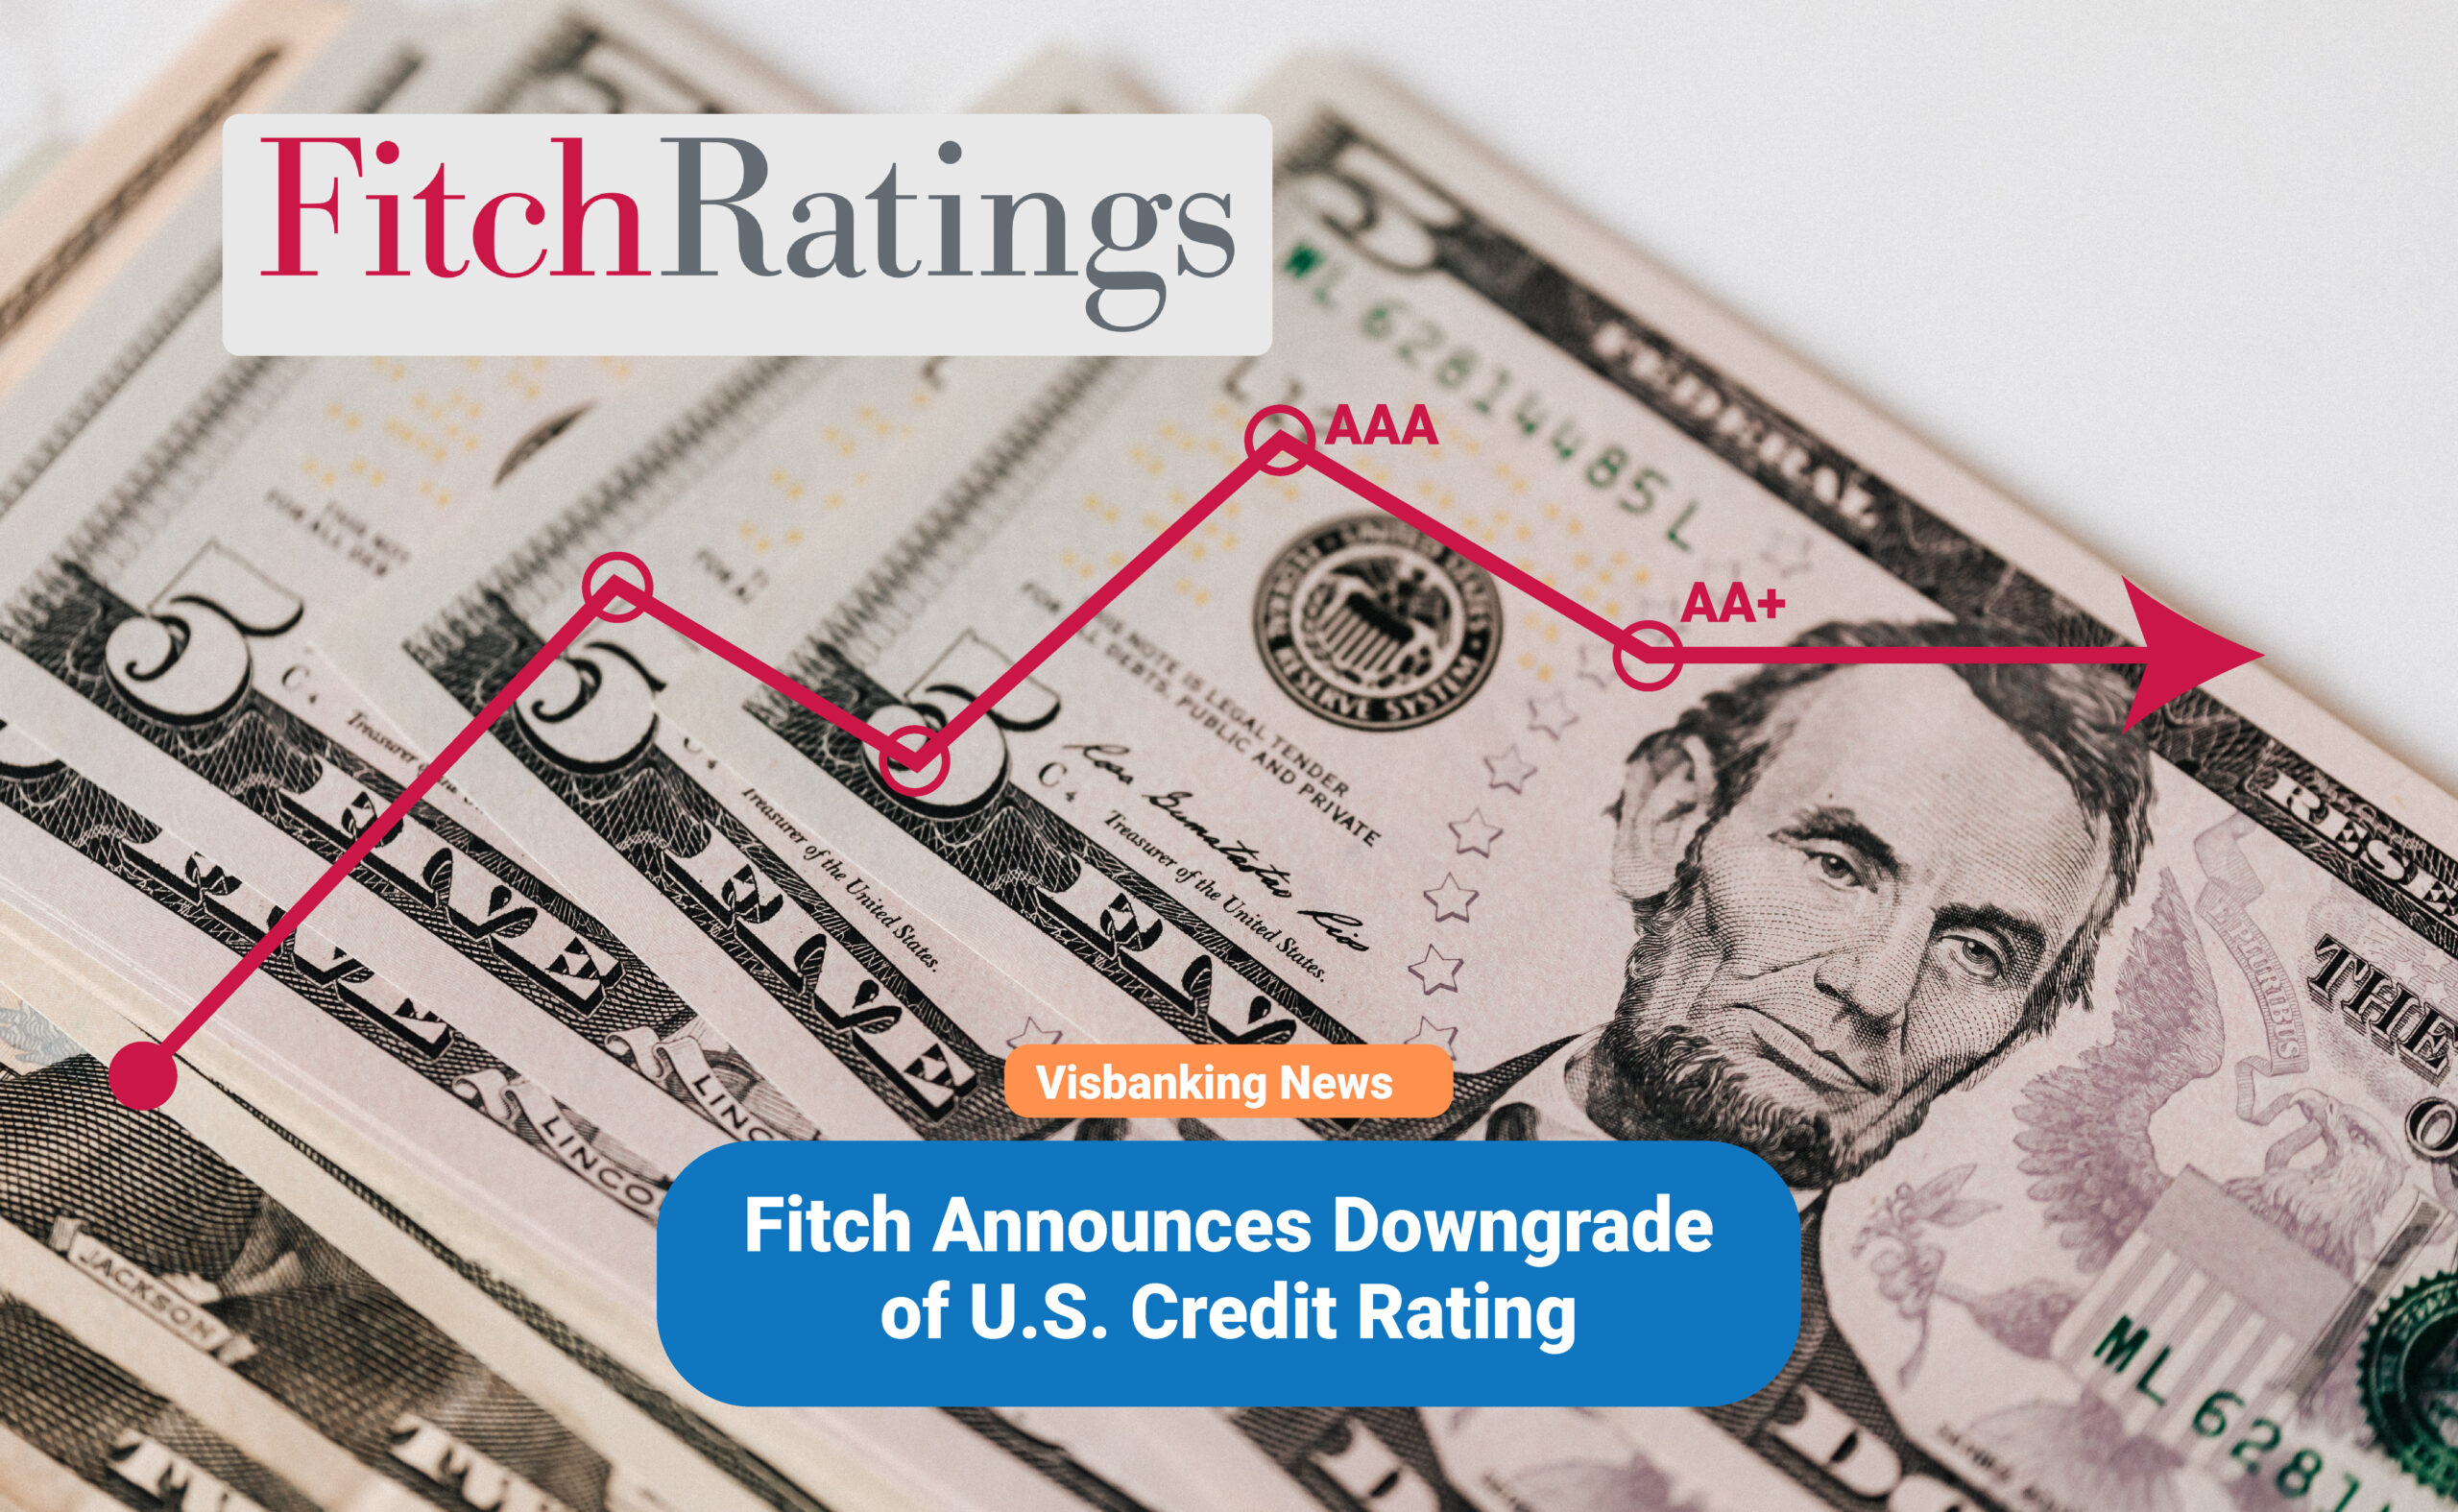 Fitch Announces Downgrade of U.S. Credit Rating